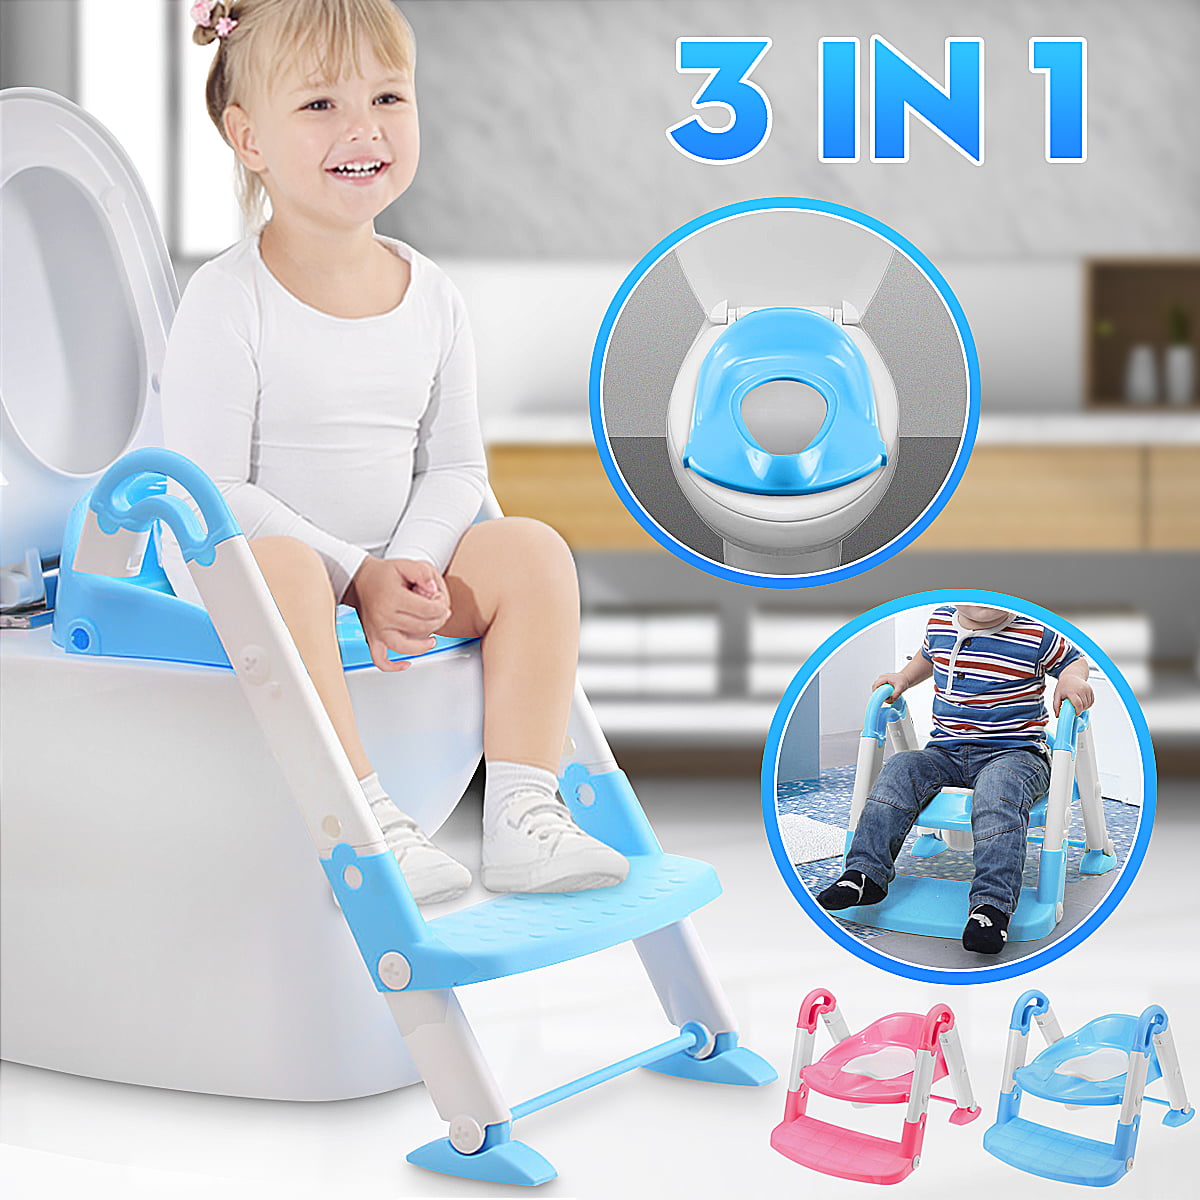 Potty Toilet Trainer Seat with Step Stool Ladder, Adjustable Trainer with Handles & Soft Cushion for Kids Toddlers 3 in 1 